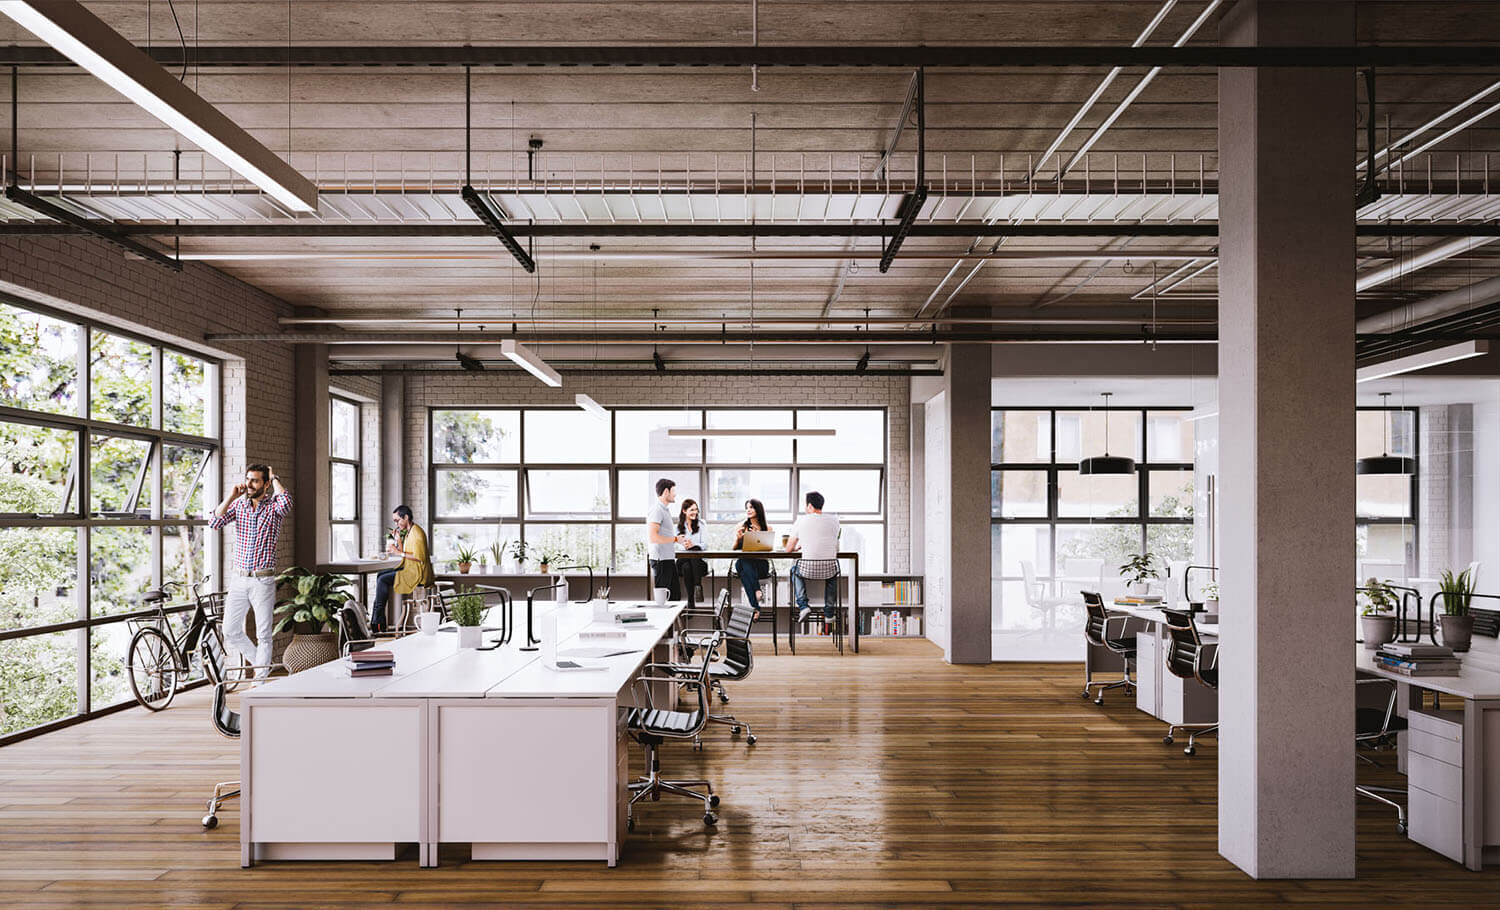 Warehouse Lofts Toronto Interior Commercial Rendering Showing People in Workspace